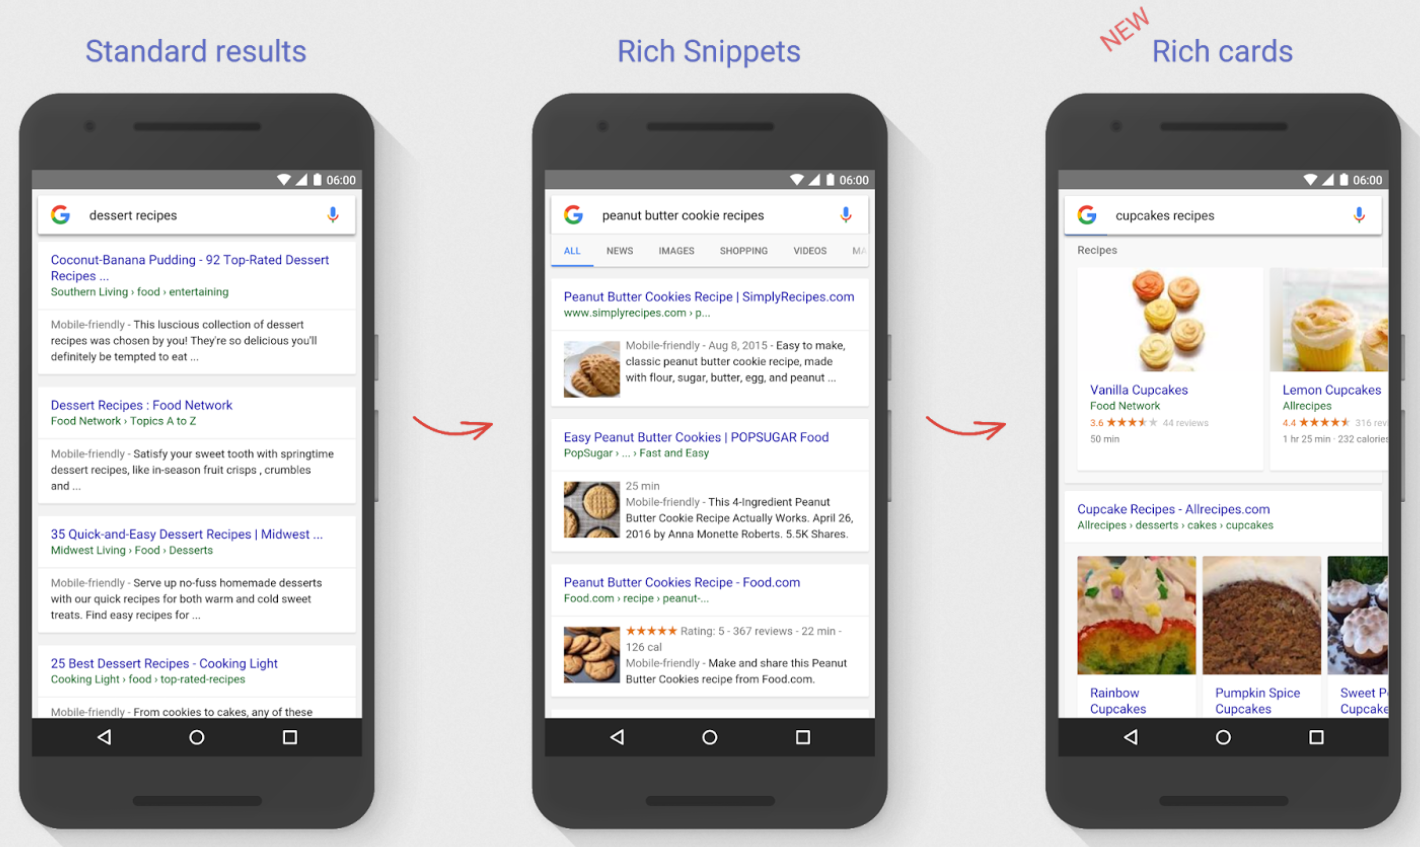 Google introduces 'Rich Cards' - Rich Cards are a win-win-win for Google, site owners and mobile users